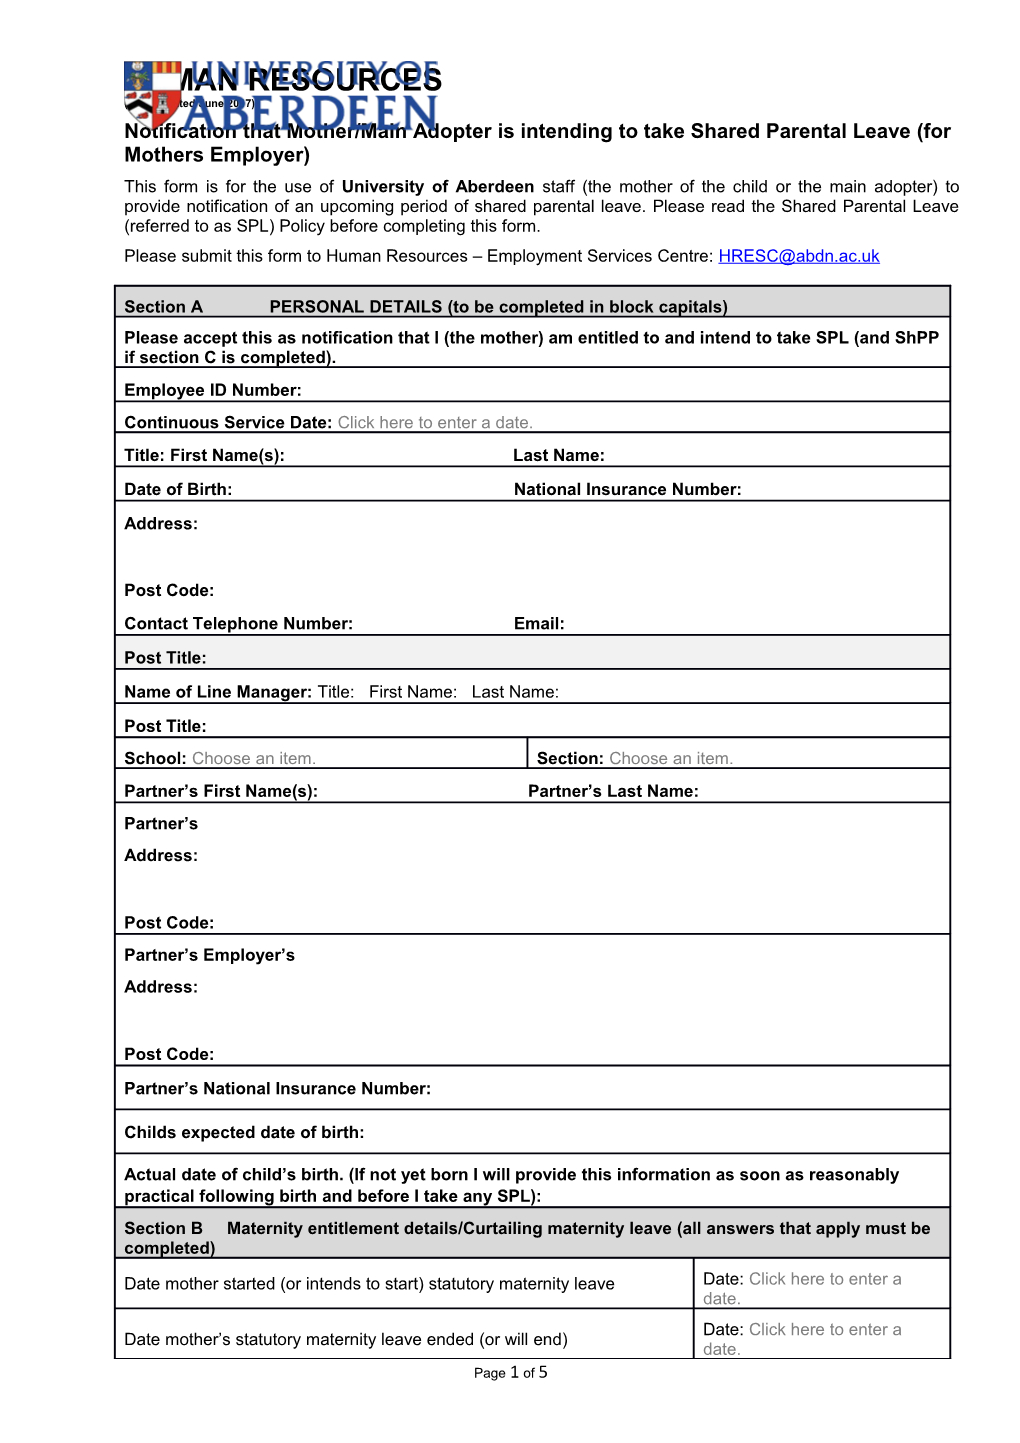 Please Submit This Form to Human Resources Employment Services Centre